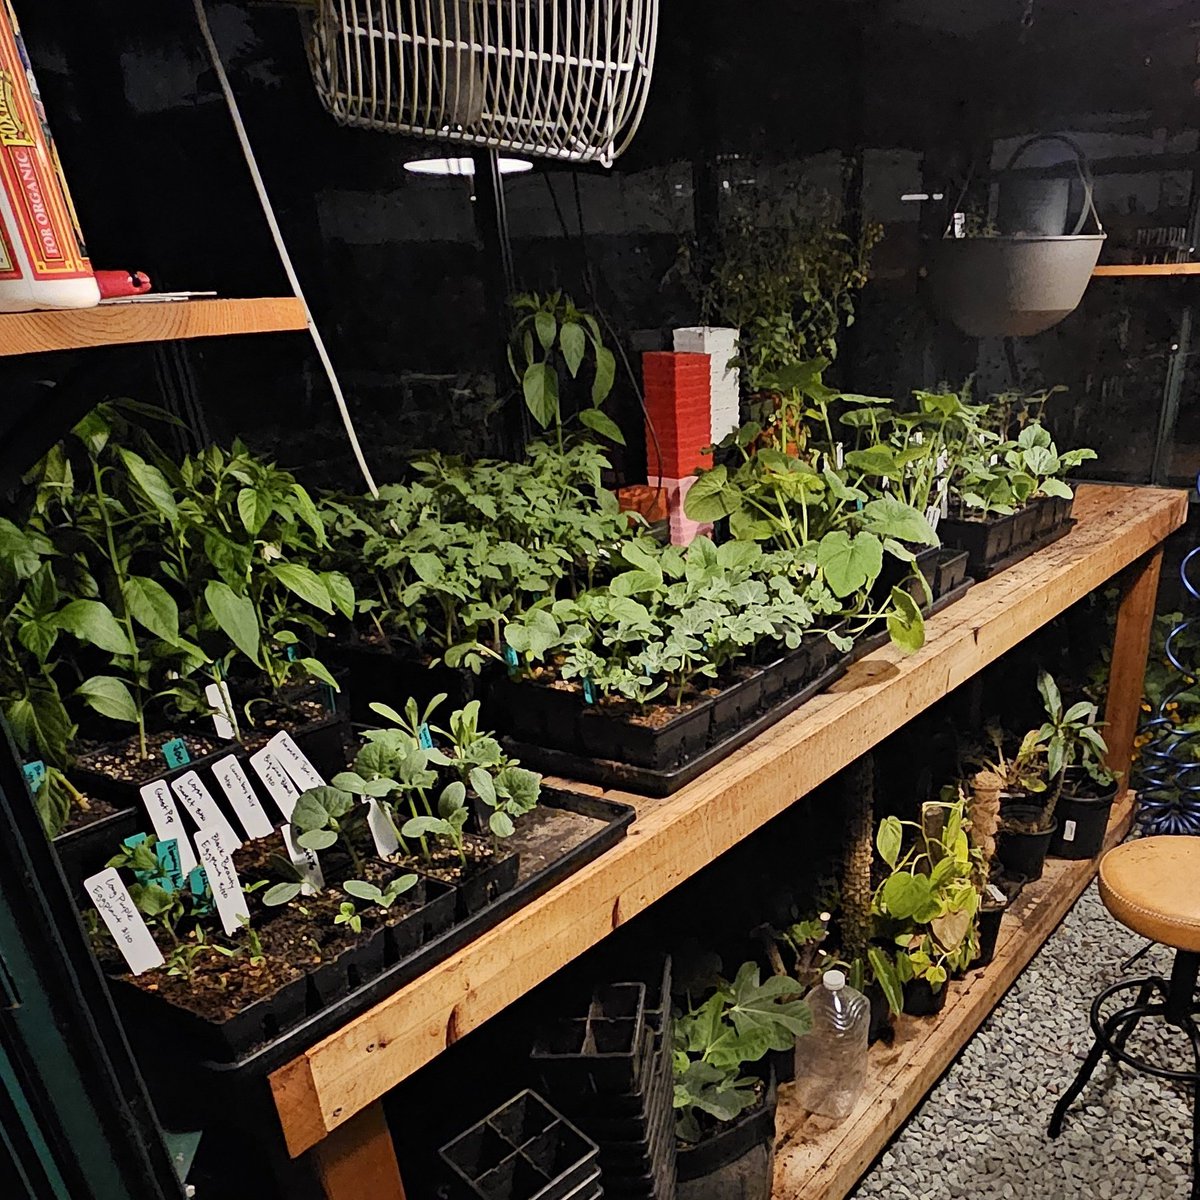 Late night greenhouse sessions >>>